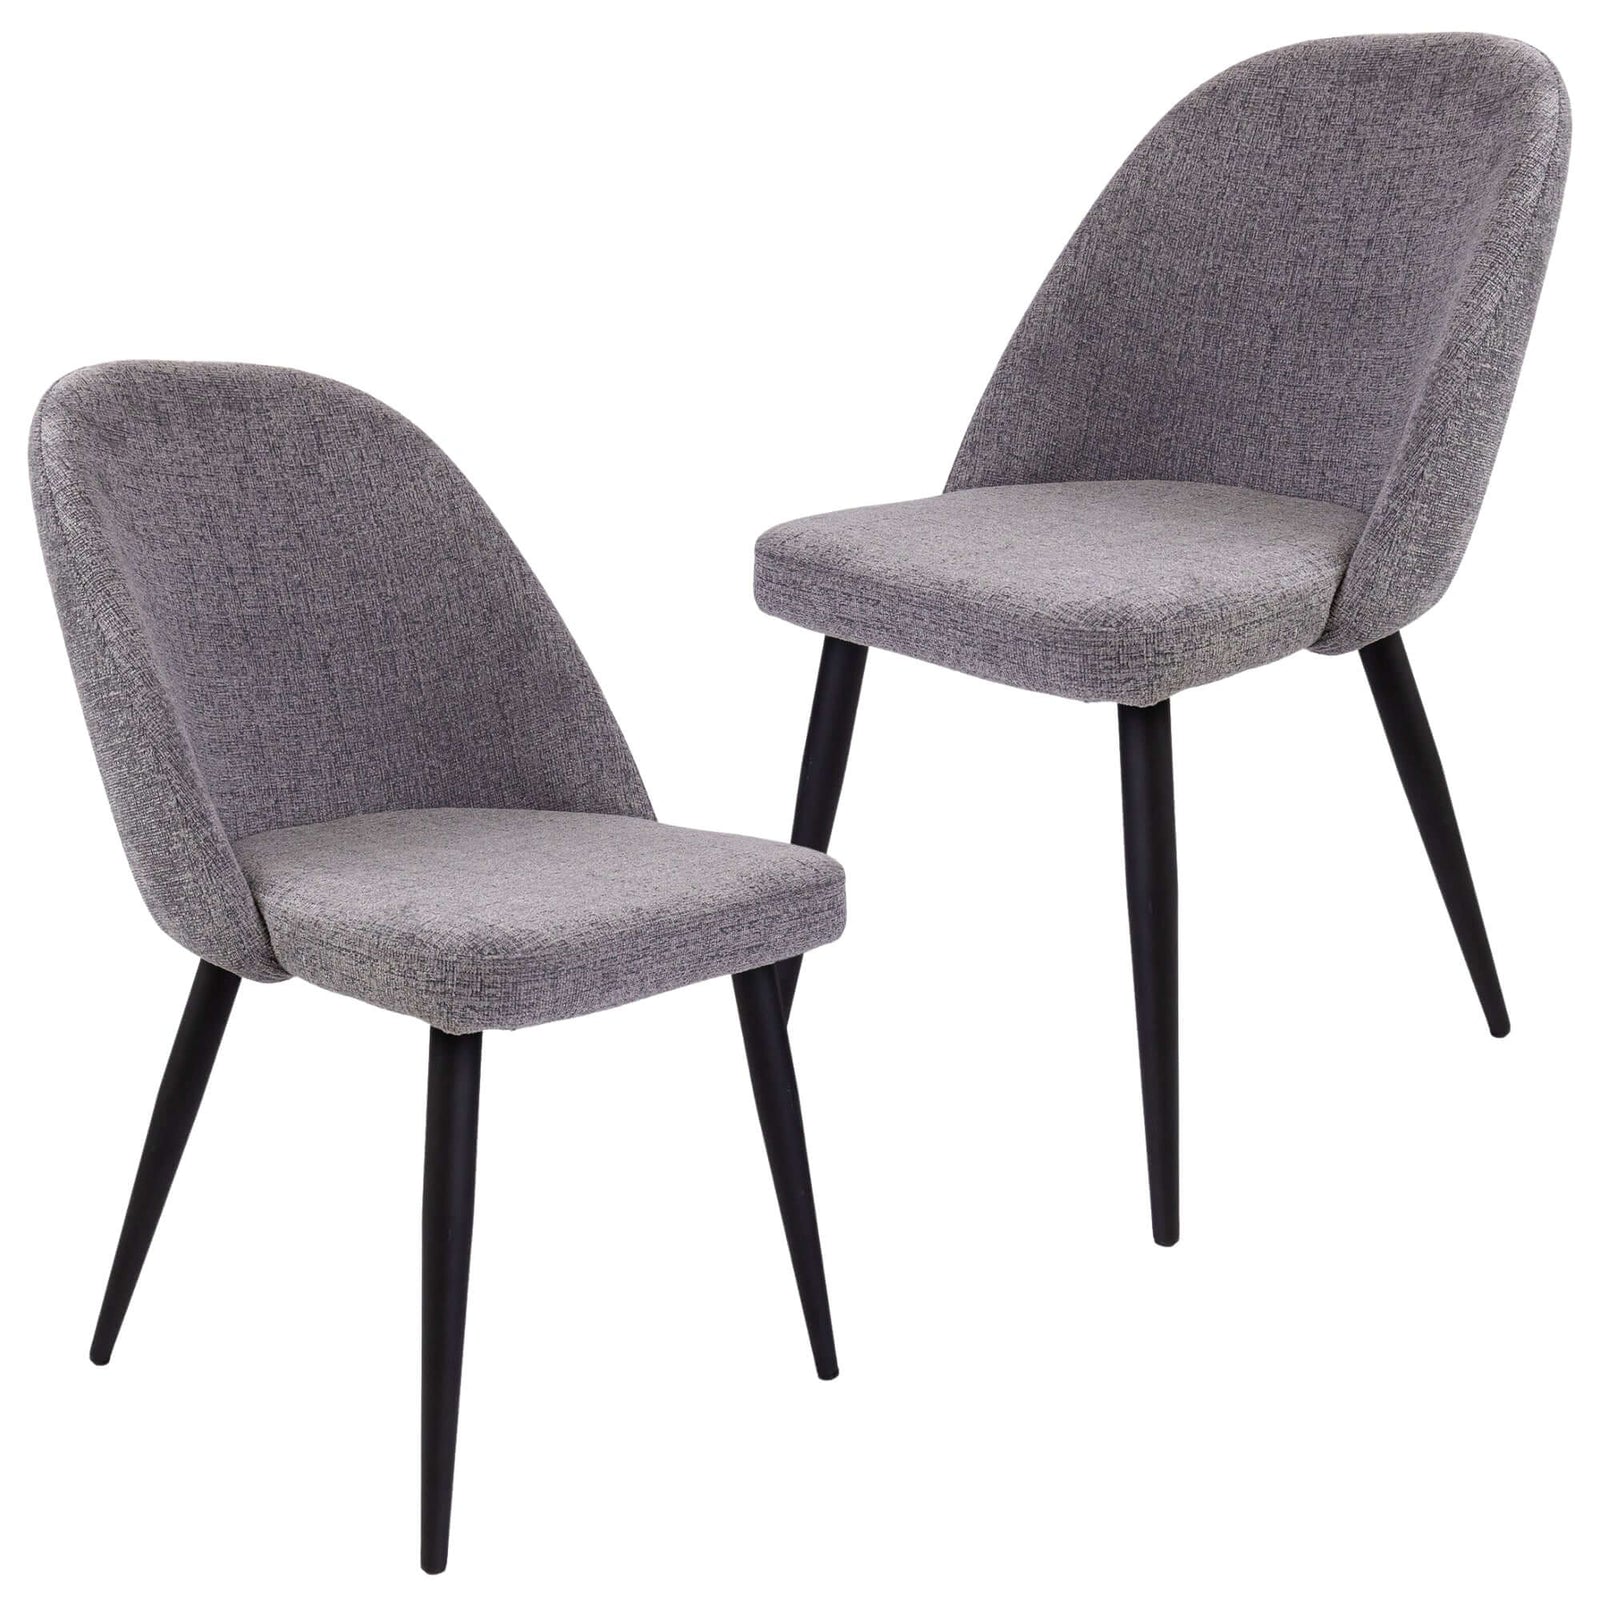 Erin Dining Chair Set of 2 Fabric Seat with Metal Frame - Fog-Upinteriors